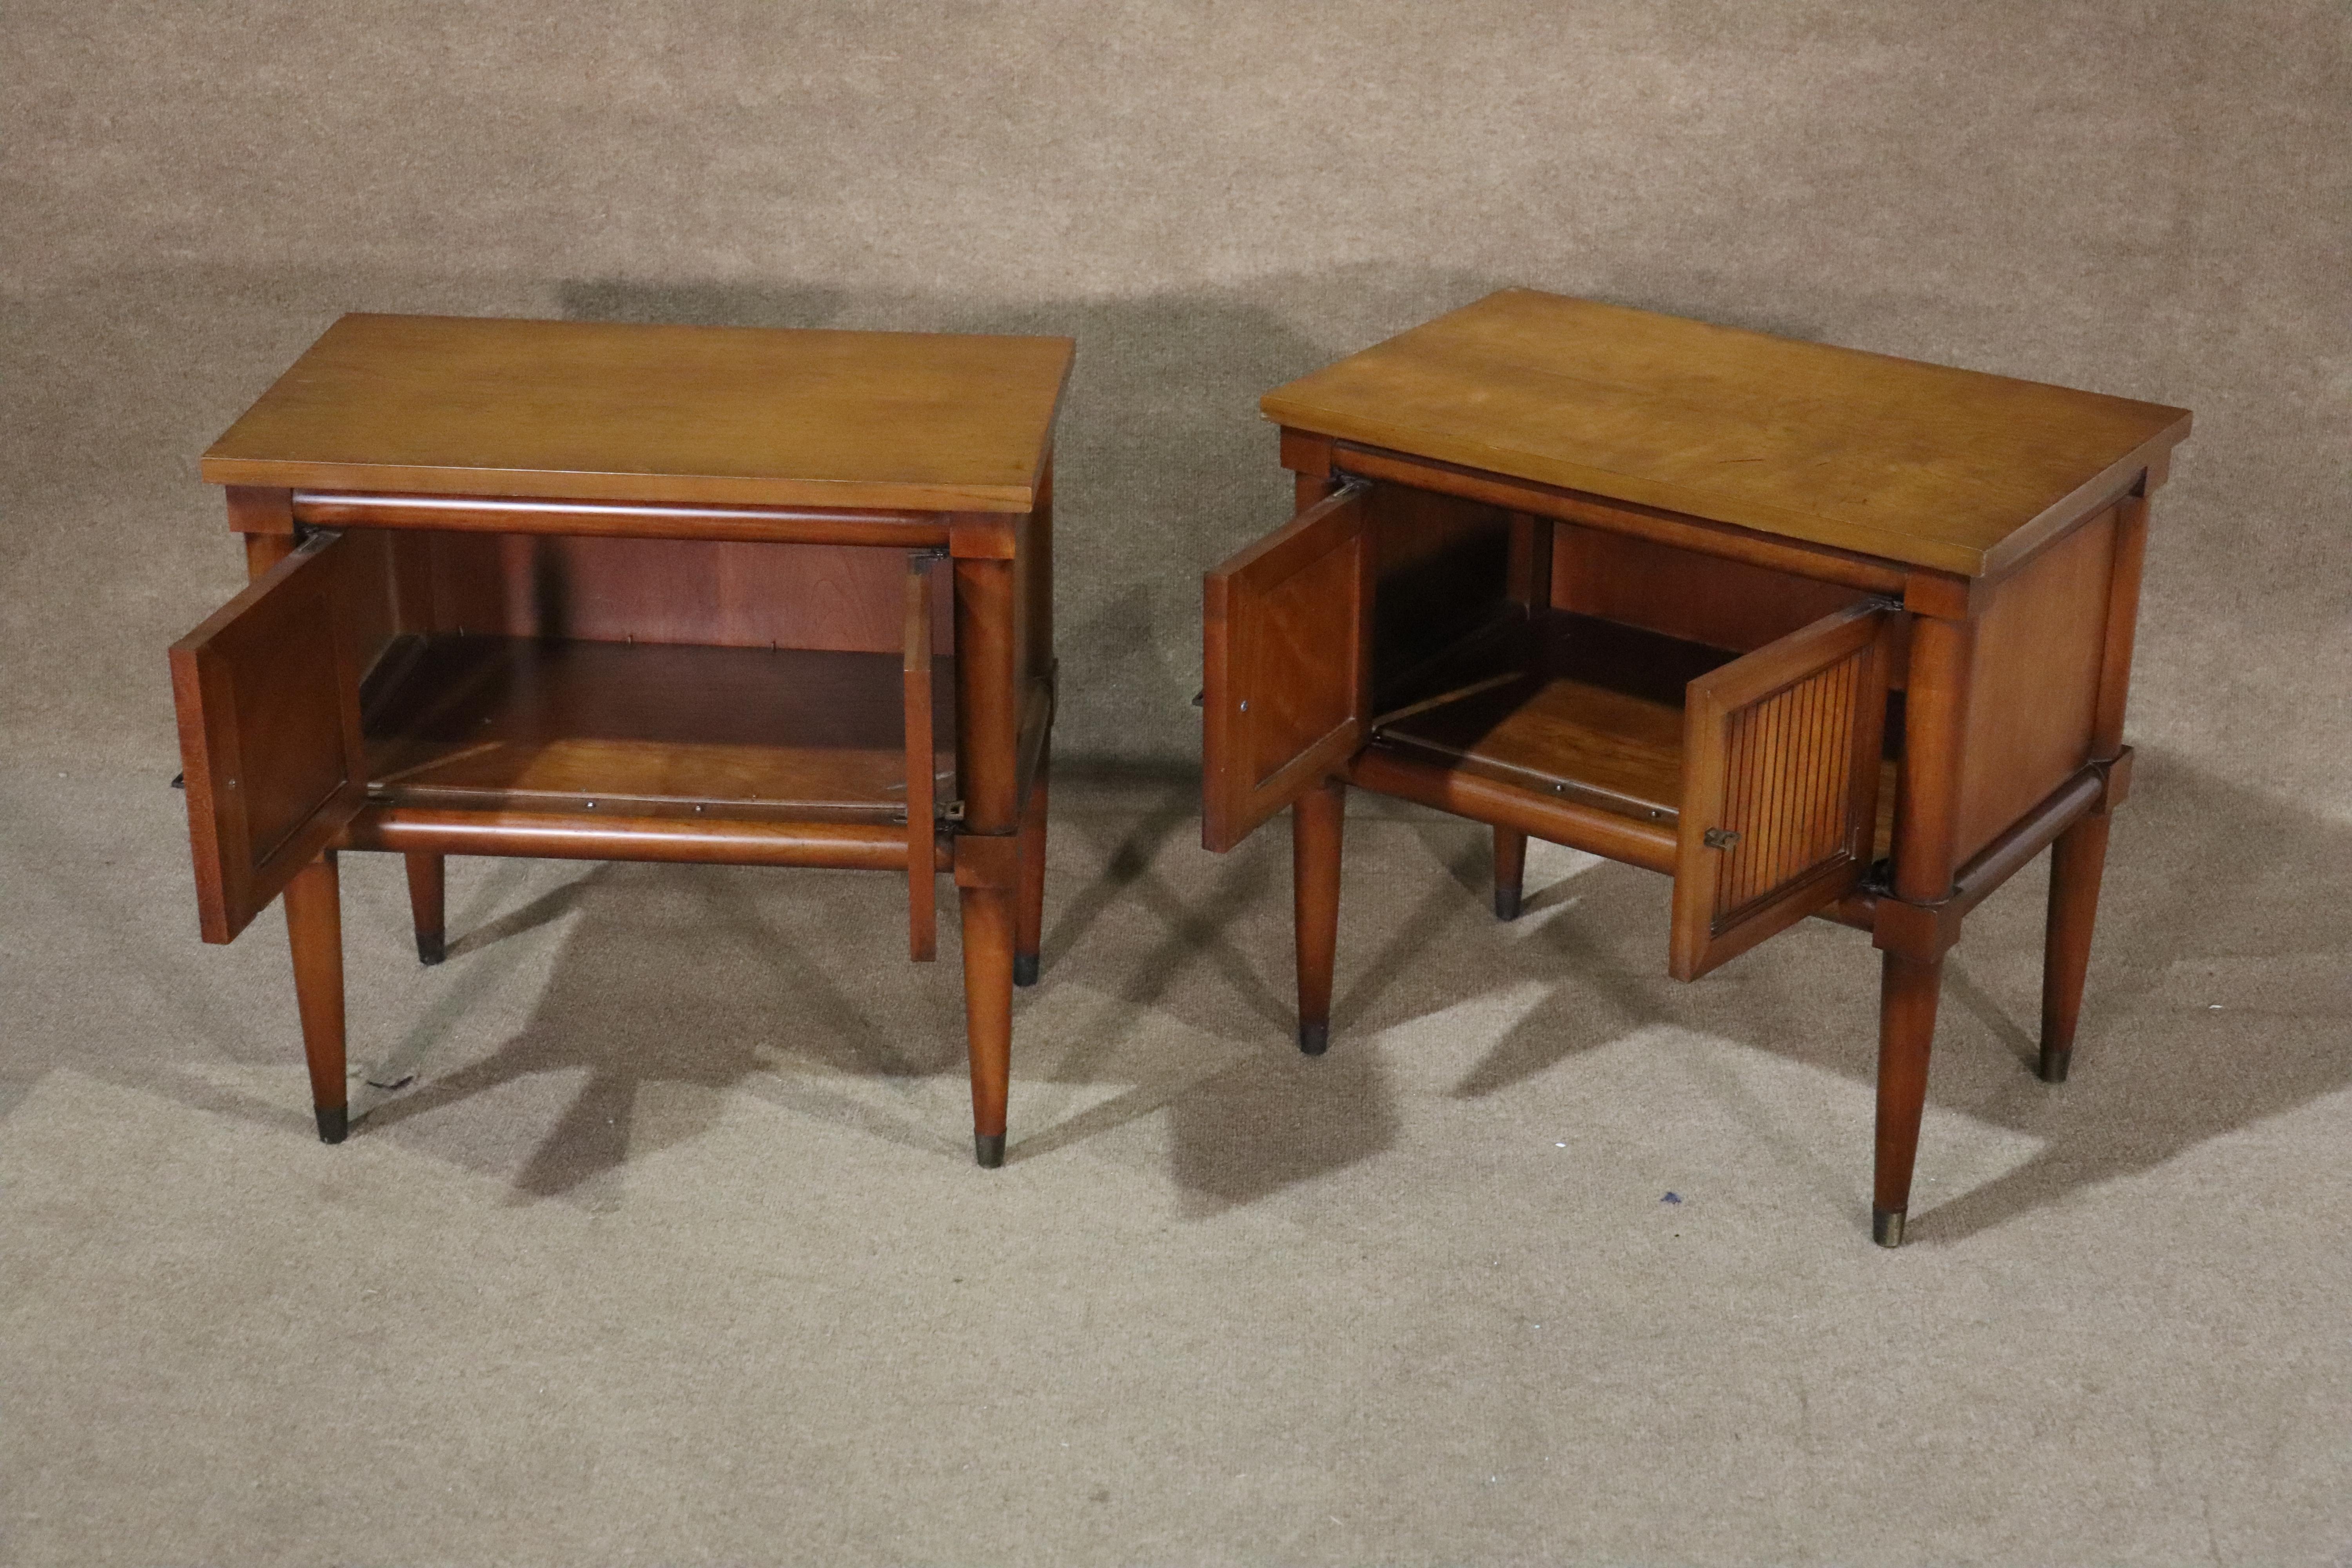 Pair of vintage modern nightstands by White Furniture with two door cabinet space.
Please confirm location NY or NJ